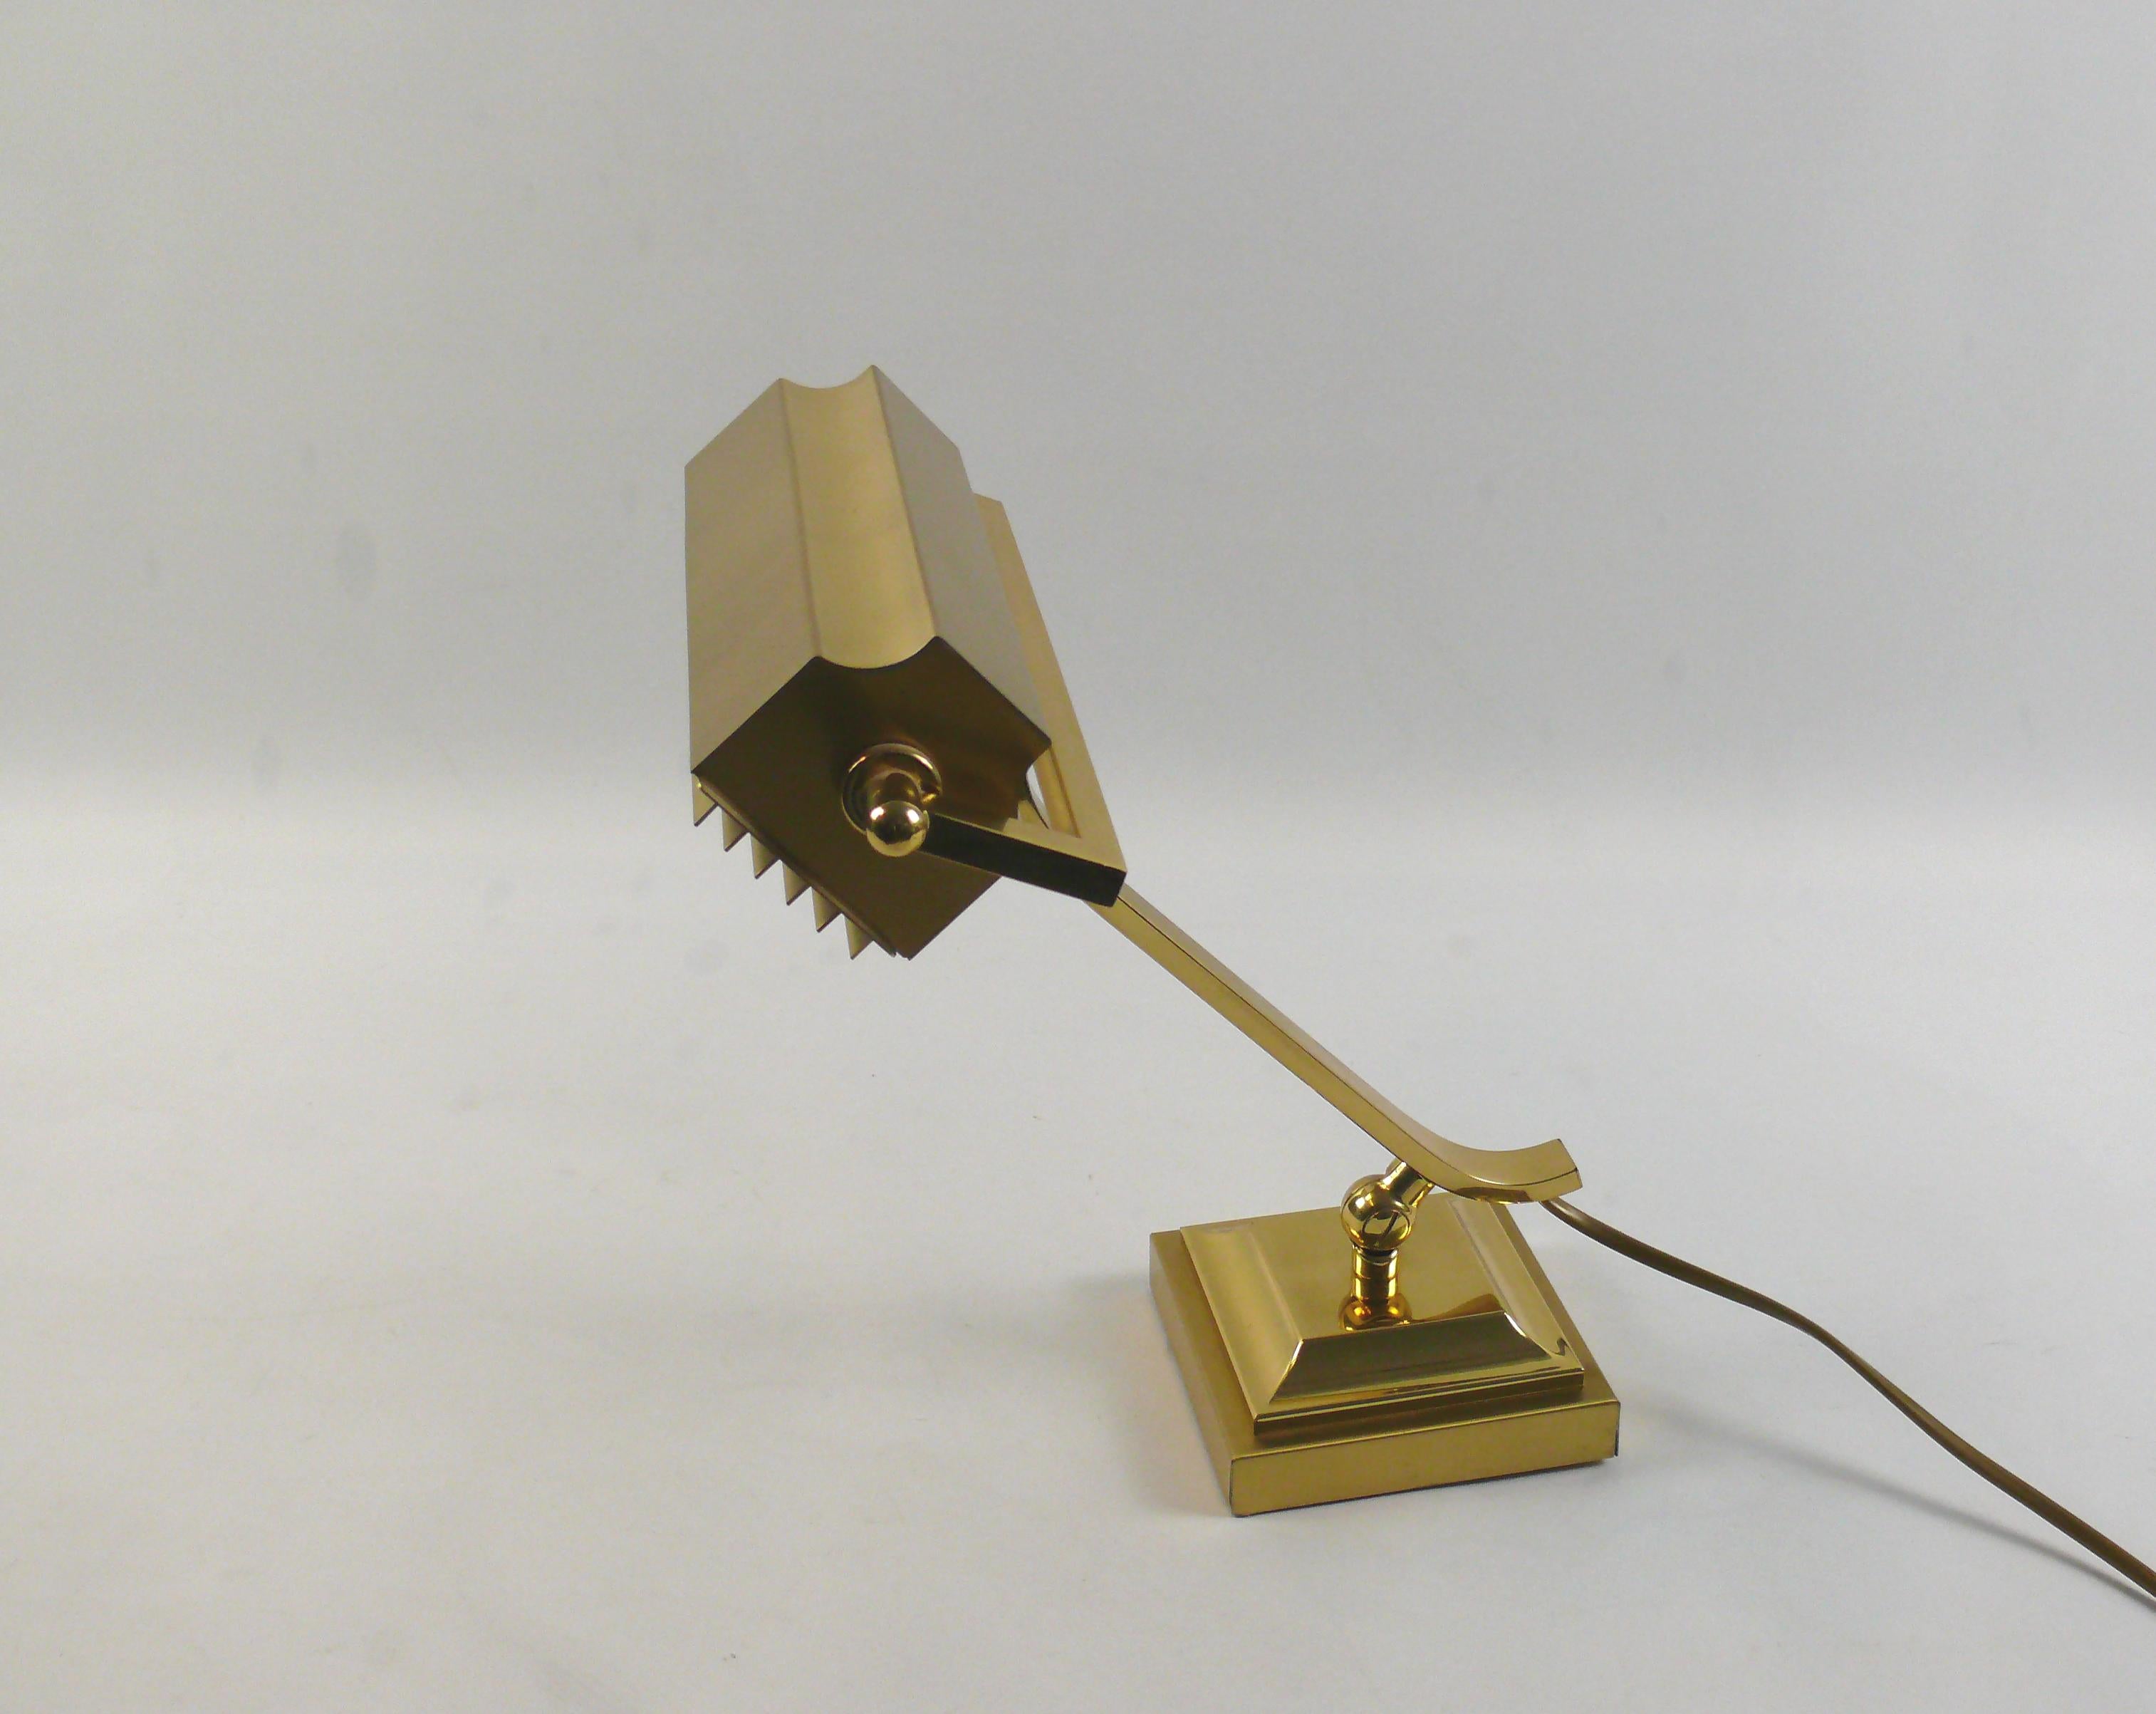 Rare, very solid and heavy piano lamp made of brass, circa 1960s - 1970s with removable glare protection. The lamp is made of shiny brass with almost no signs of aging on the brass surface. The umbrella and the arm can be adjusted. The joint can be